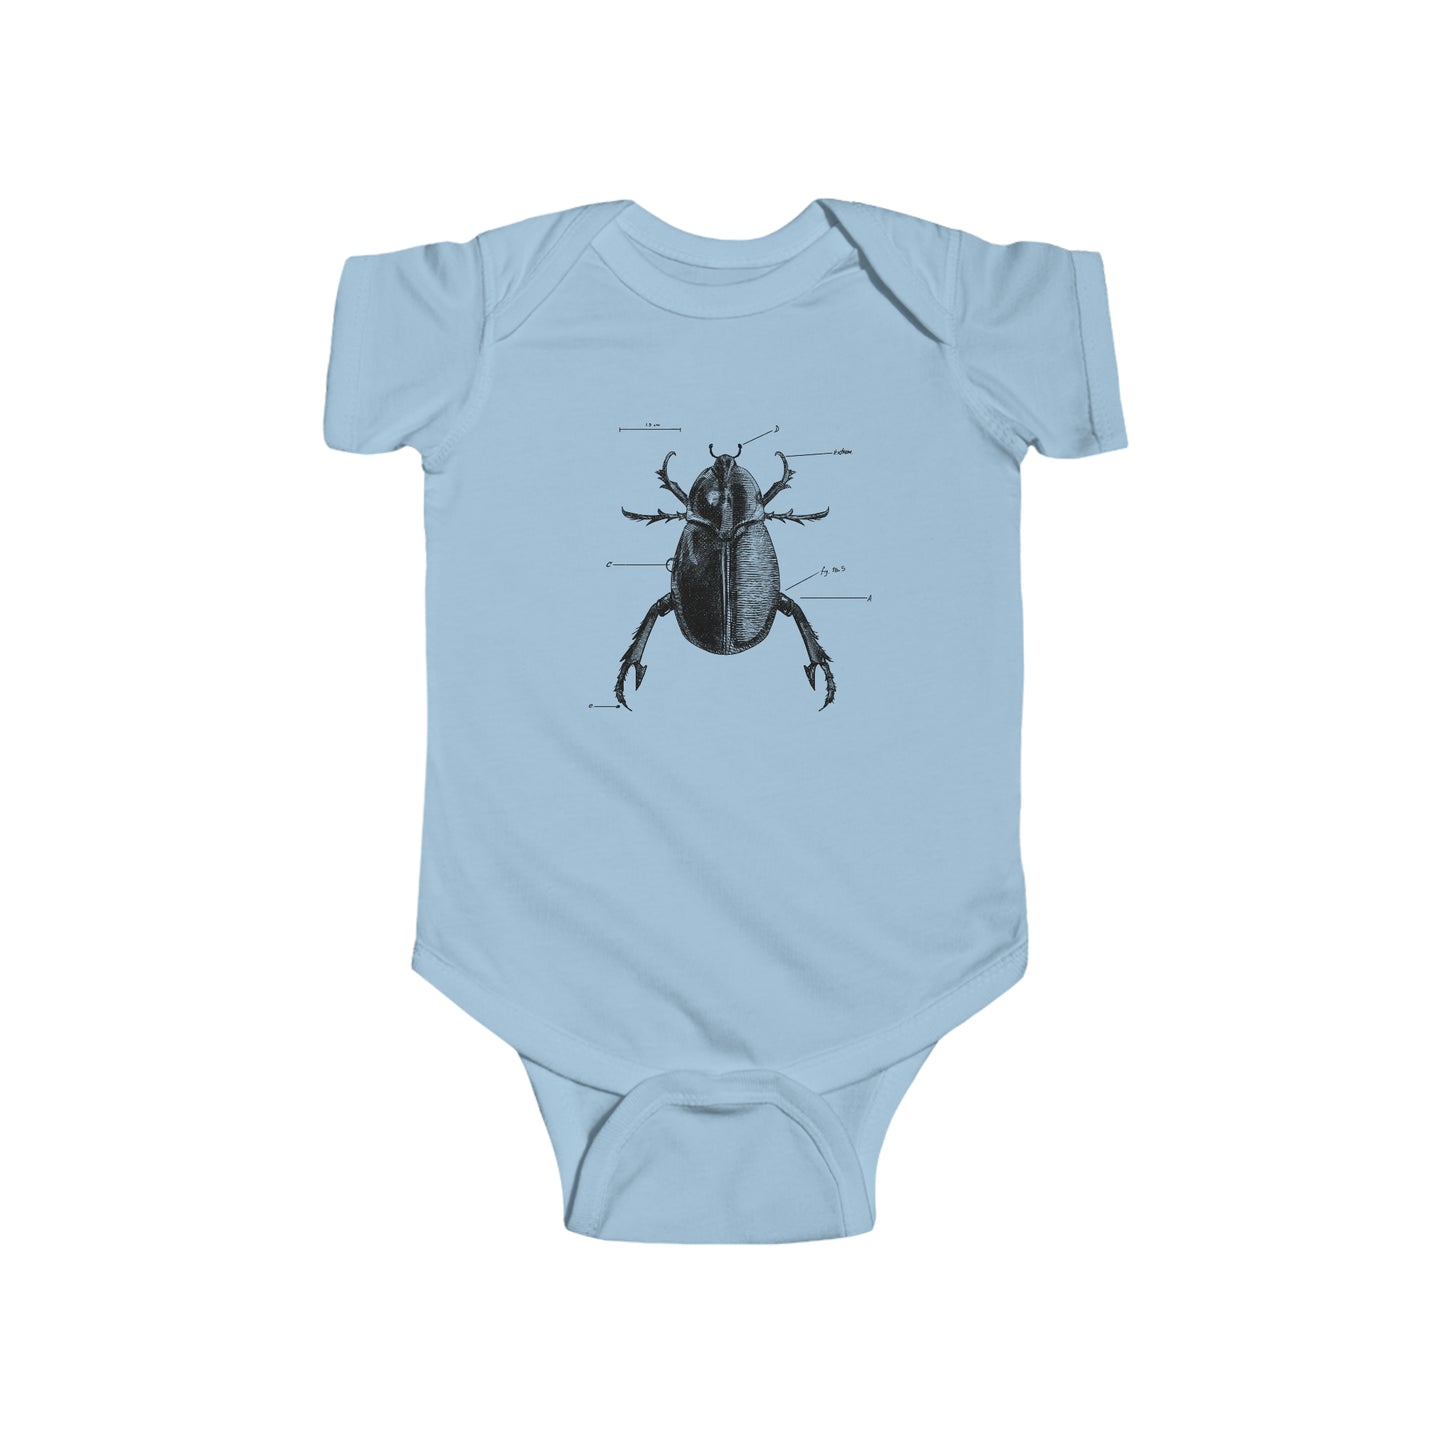 Infant Baby Insect Graphic Jersey Bodysuit Onesie